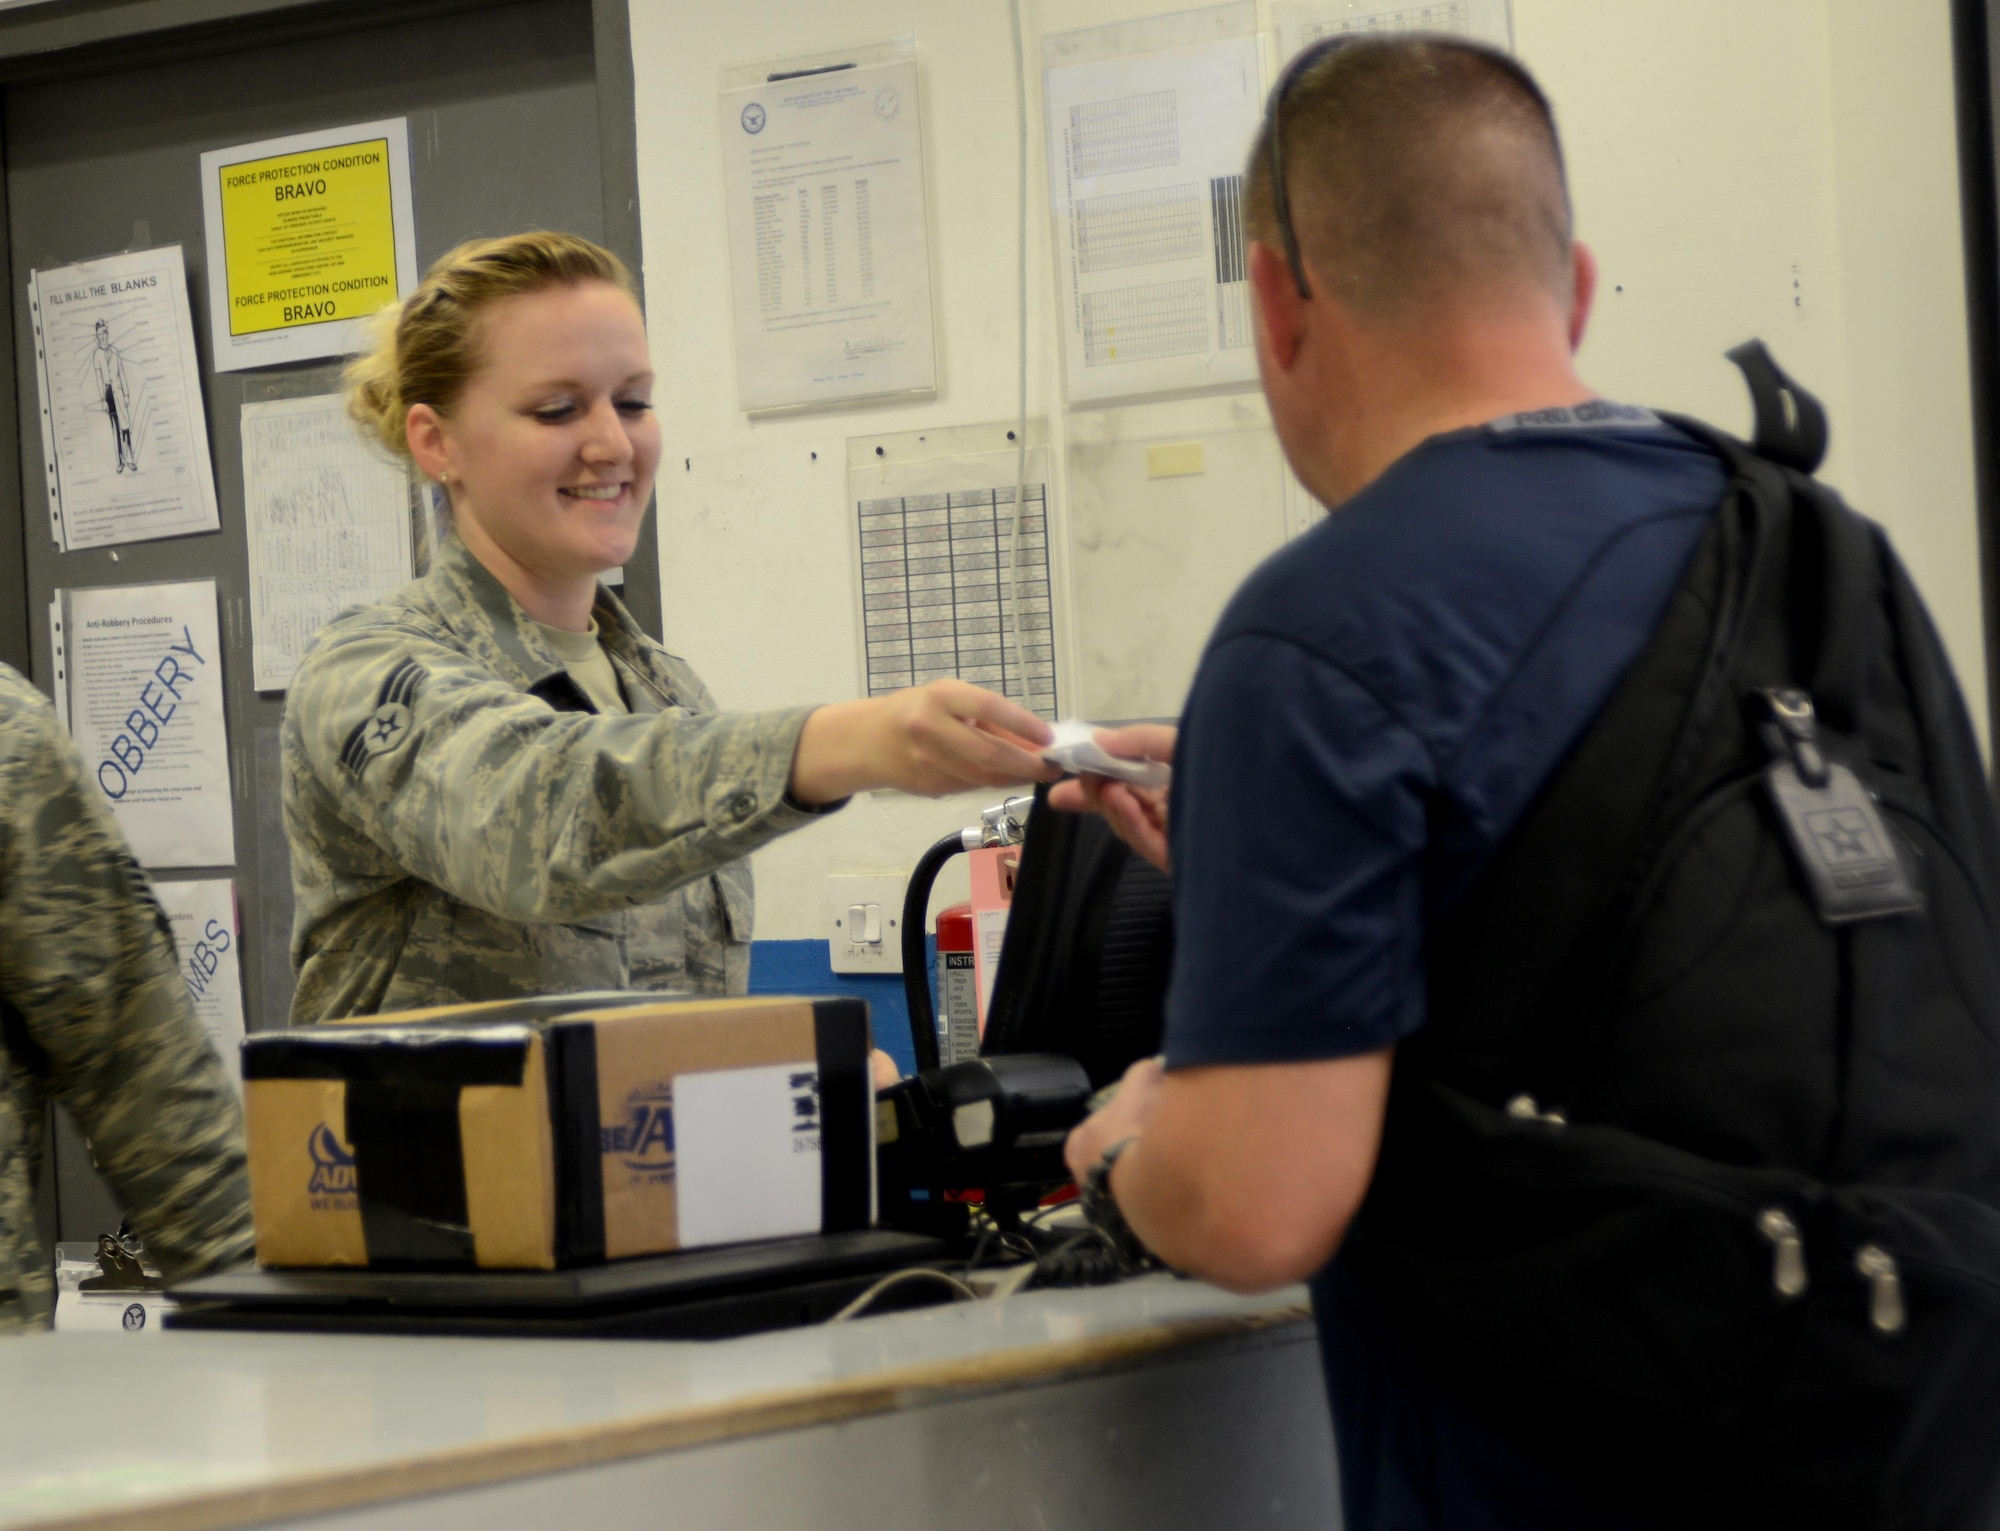 U.S. Air Force Senior Airman Stacie Rhodes, left, 379th Expeditionary Communications Squadron, hands a receipt to a customer, March 10, 2015, at Al Udeid Air Base, Qatar. The post office is just one of many morale-based mission sets that the 379th ECS provides to servicemembers here. (U.S. Air Force photo by Senior Airman Kia Atkins)